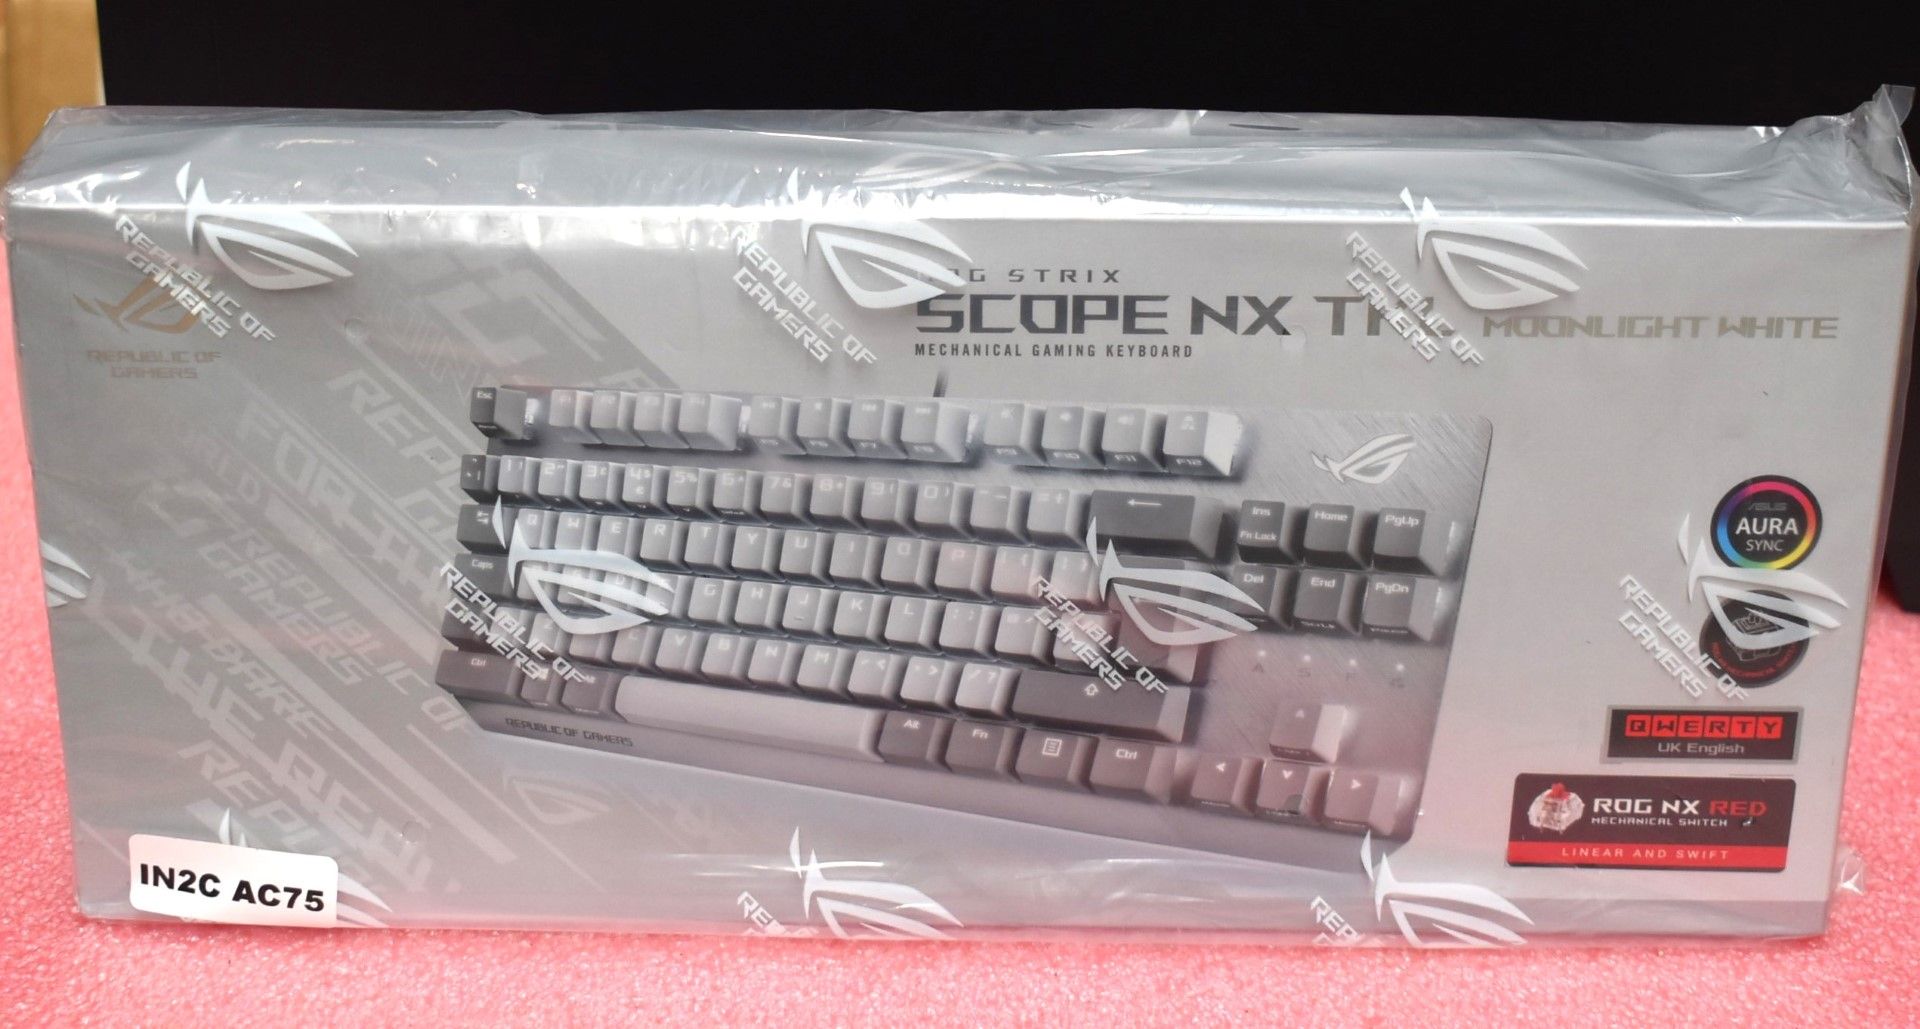 1 x Asus ROG Strix Scope NX TKL Moonlight White Wired Mechanical RGB Gaming Keyboard - Features